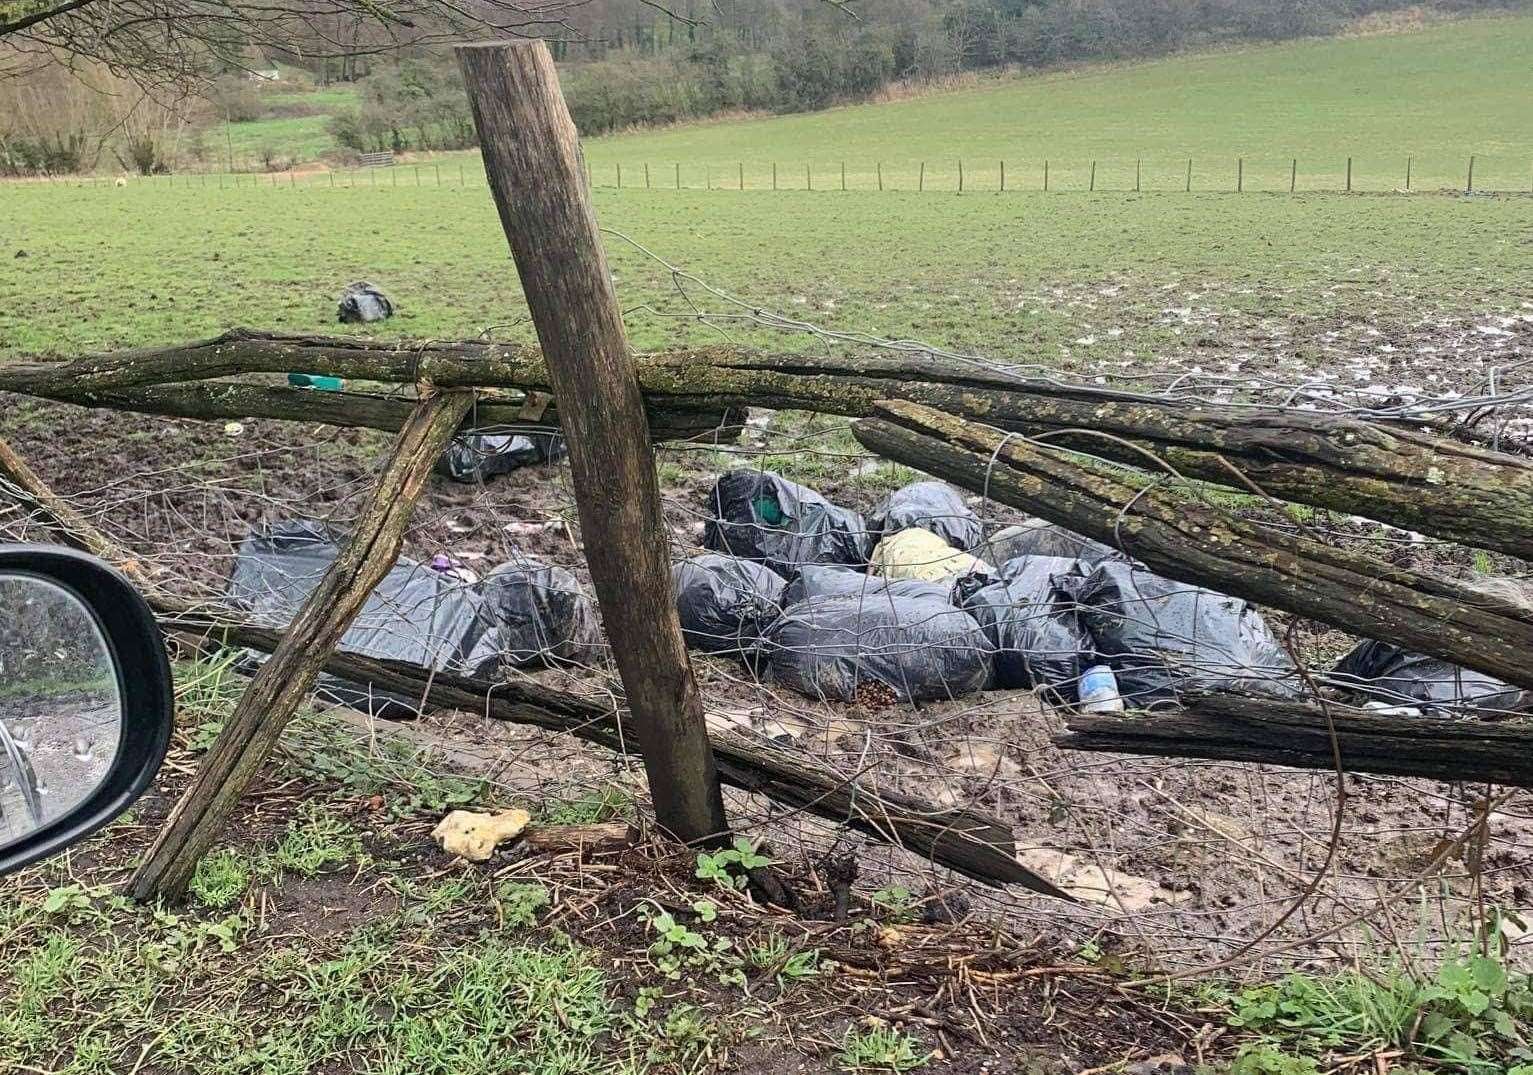 Rubbish is often dumped on the land